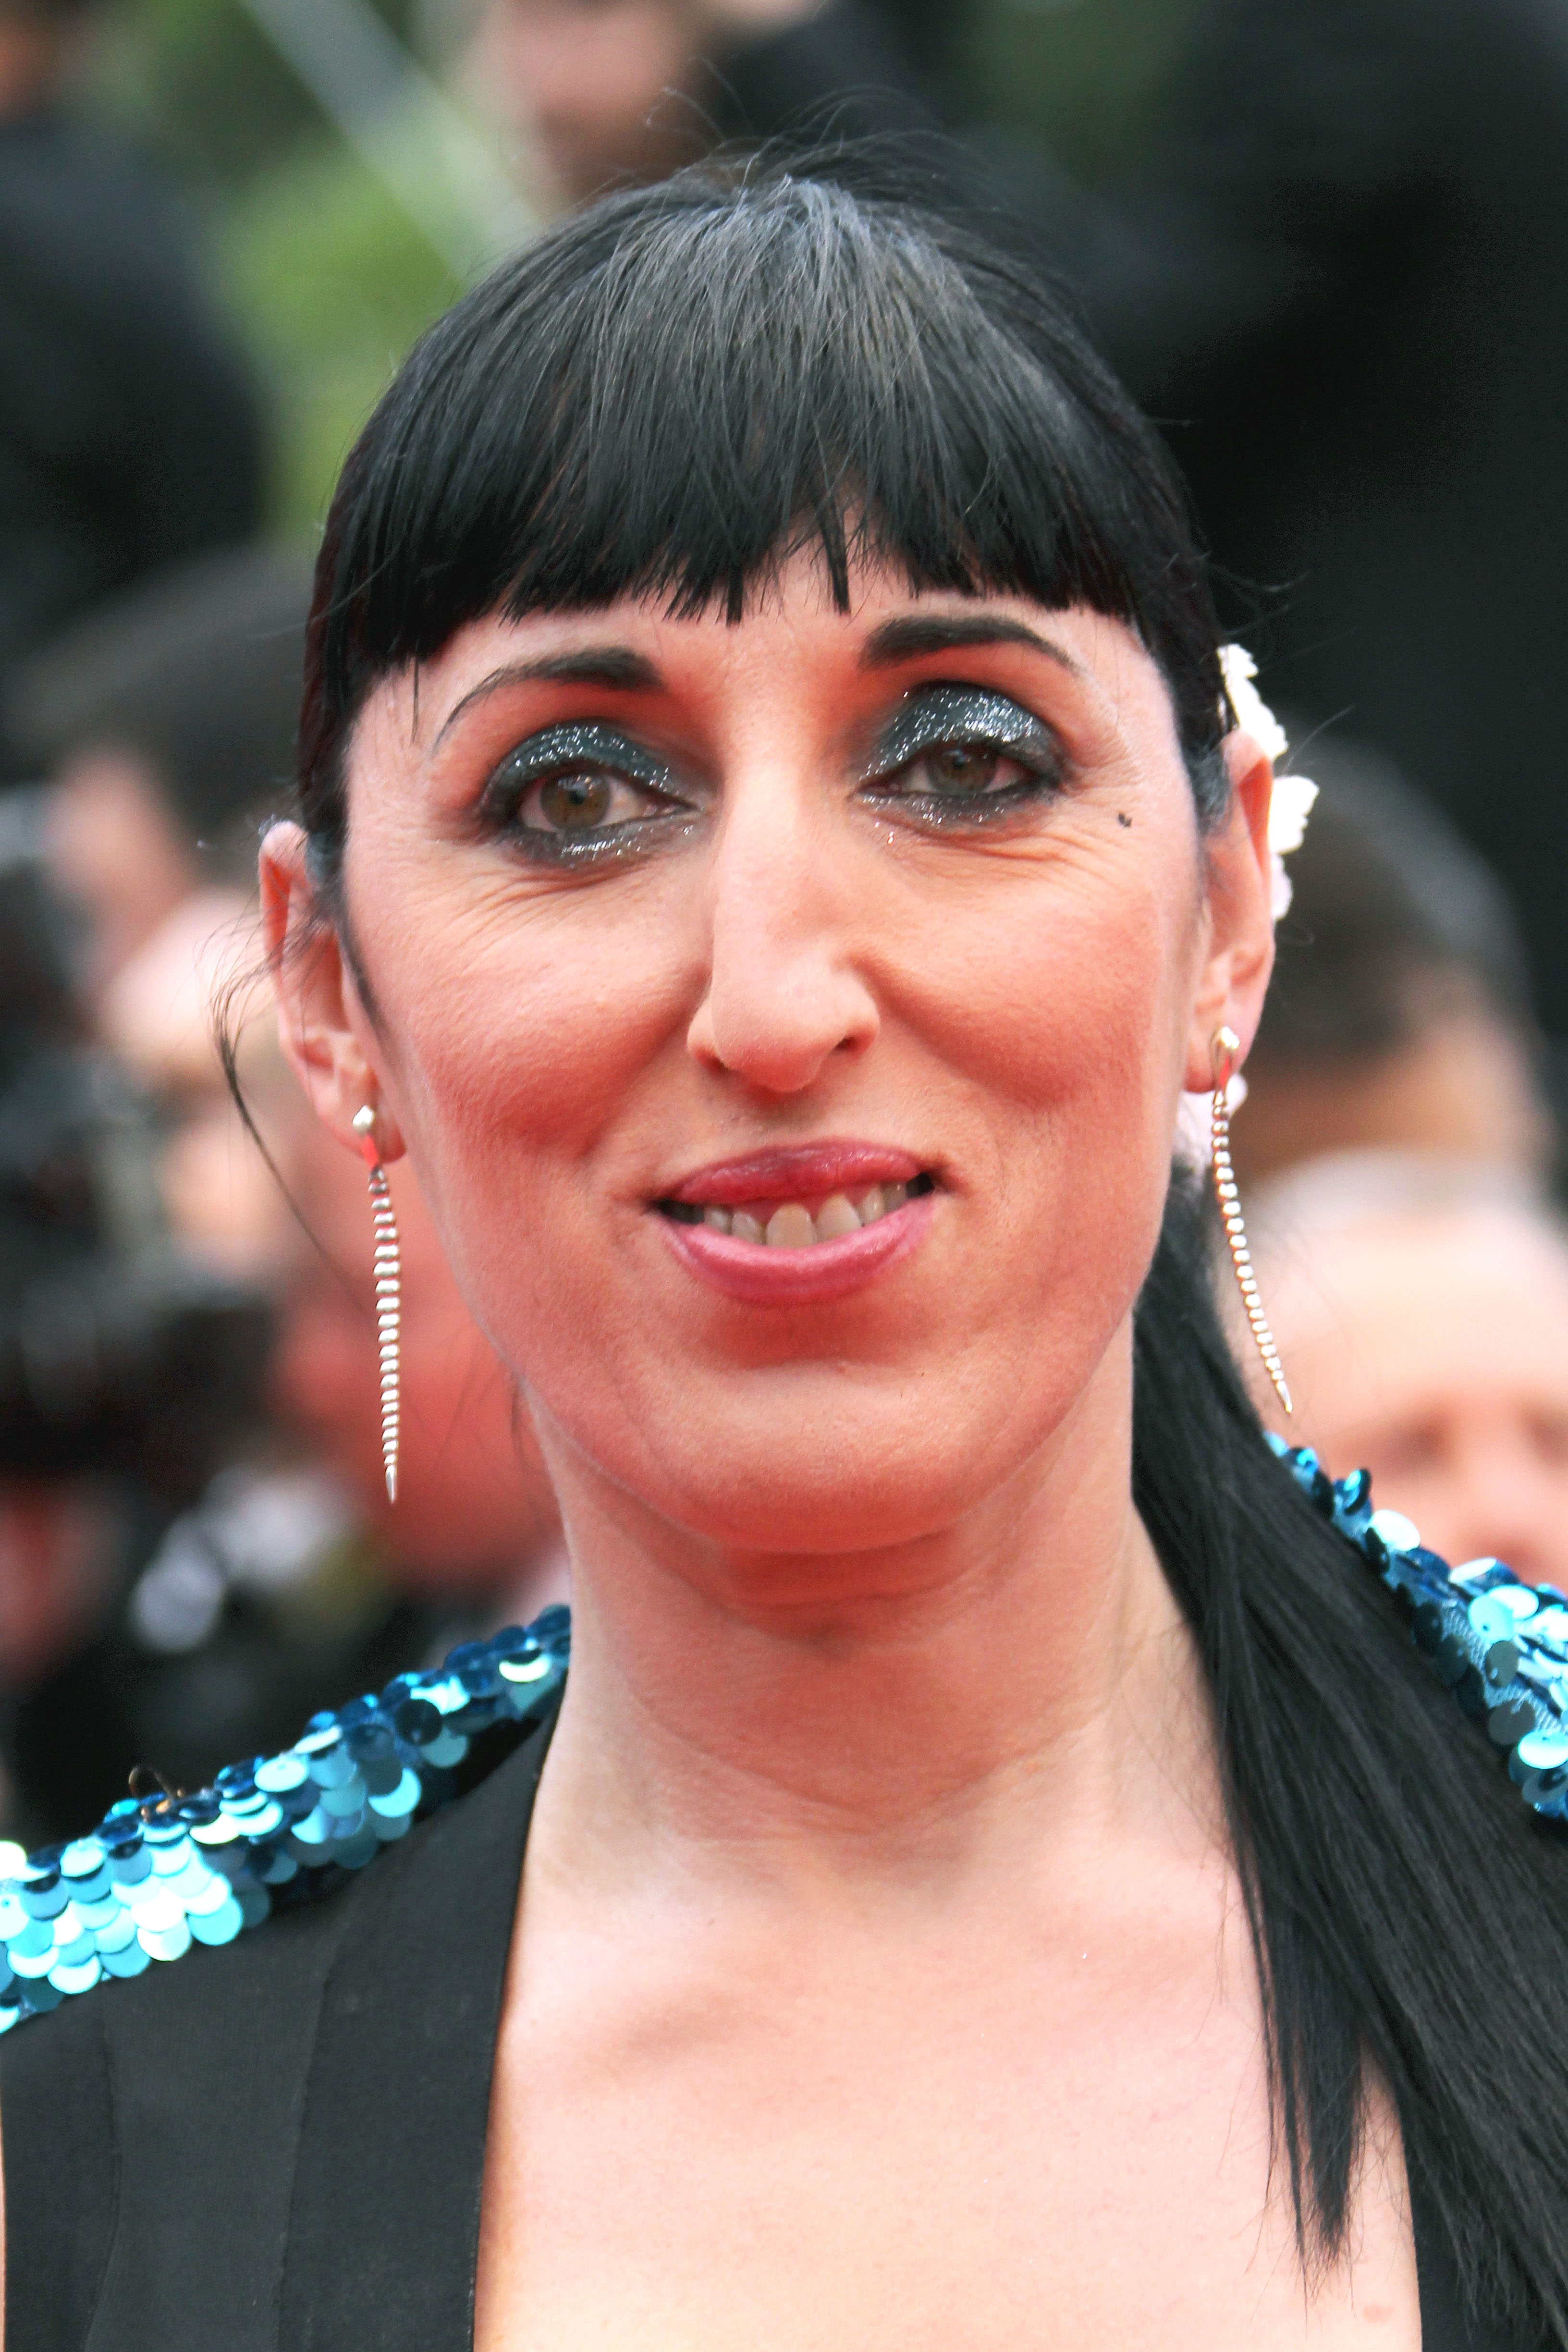 Rossy De Palma at the premiere of "You Will Meet A Tall Dark Stranger," 2010 | Source: Getty Images